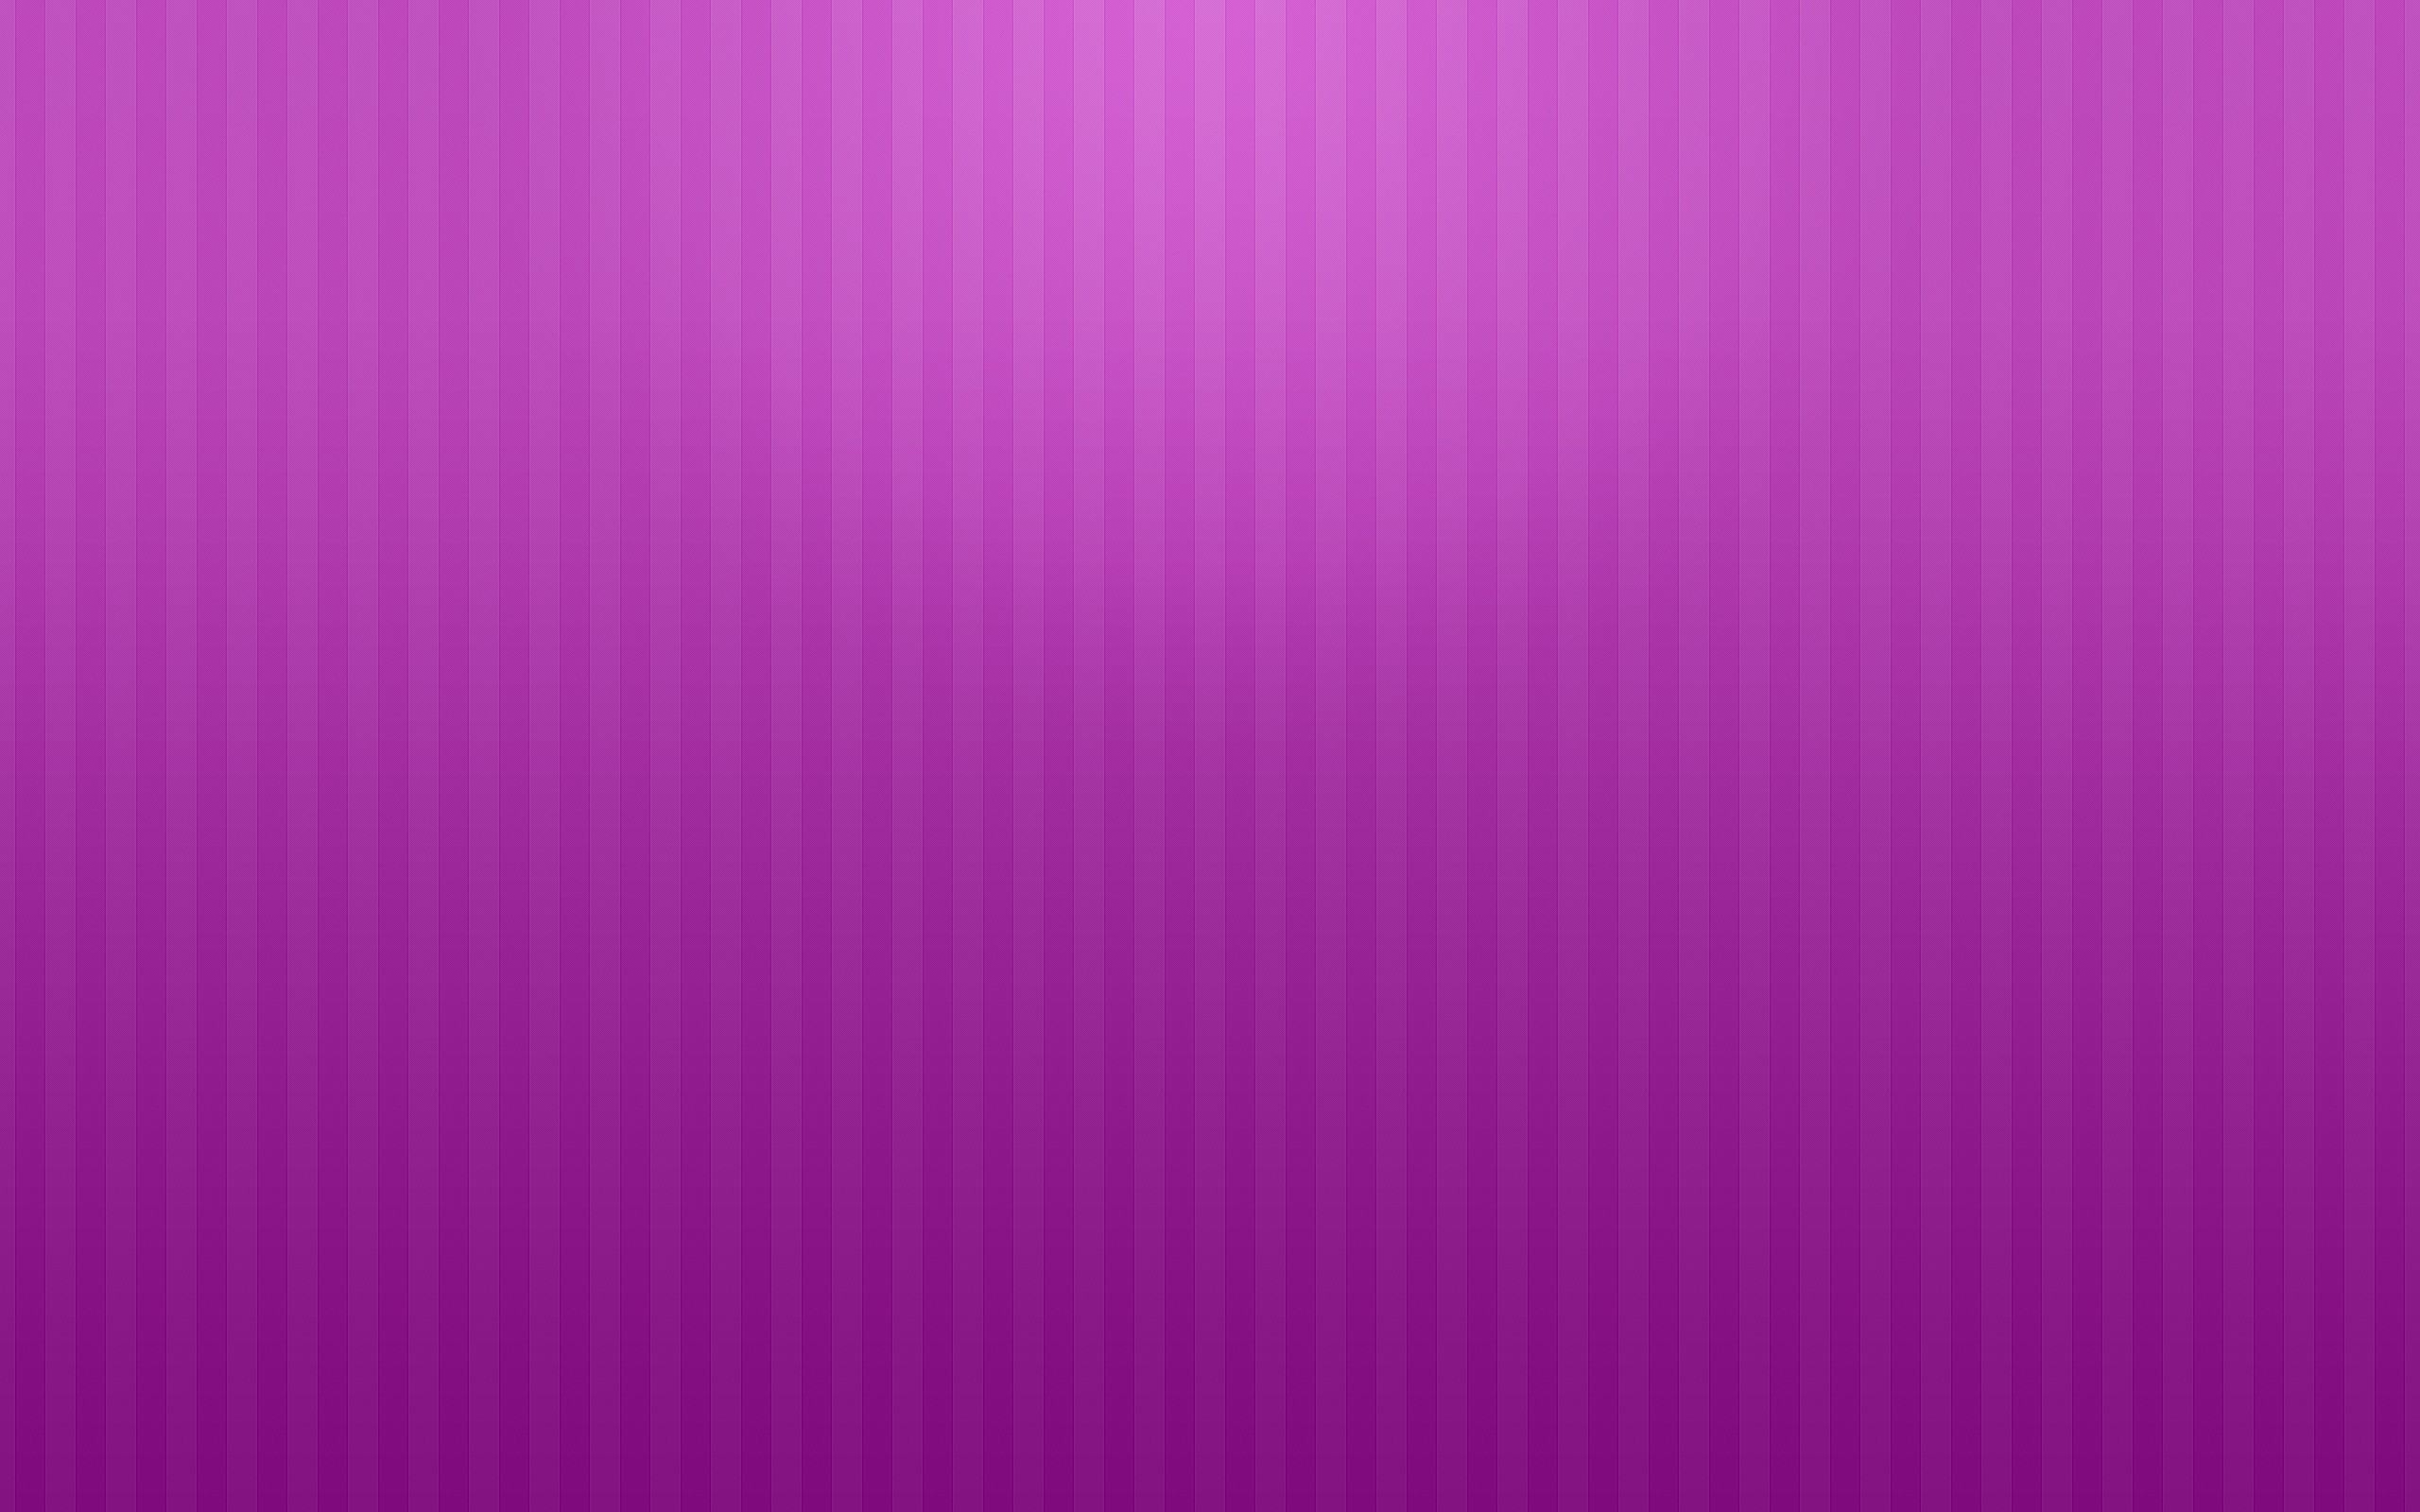 2560x1600 Wallpapers Backgrounds - Wallpaper Dark pink pian lining background  Category Plain Backgrounds